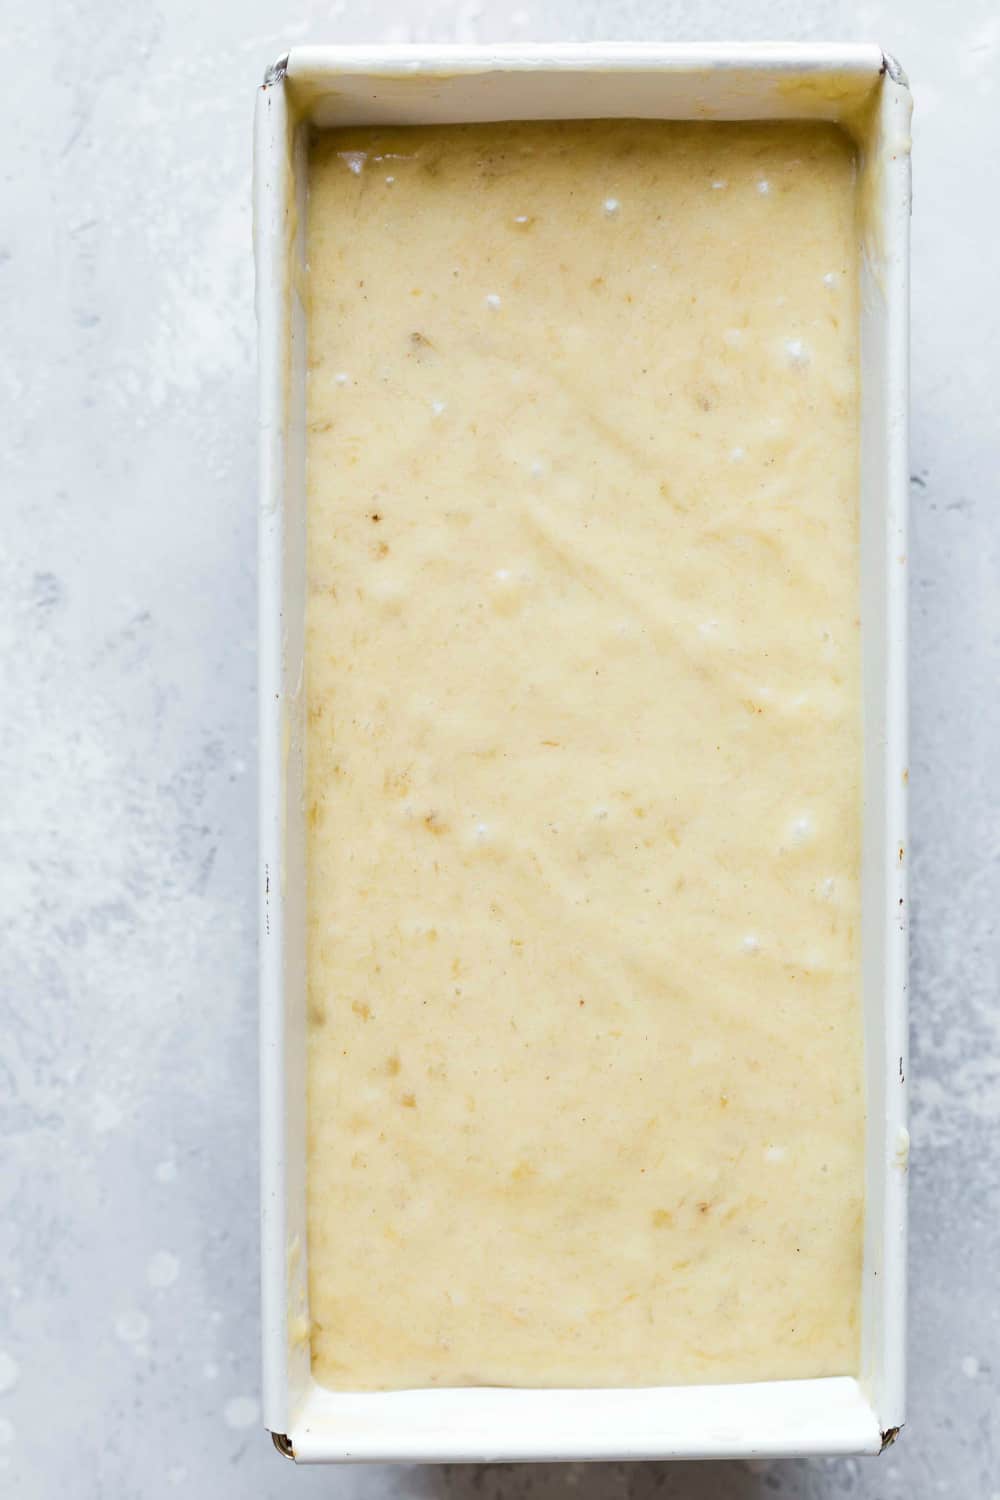 Banana bread batter in a loaf pan, ready to bake